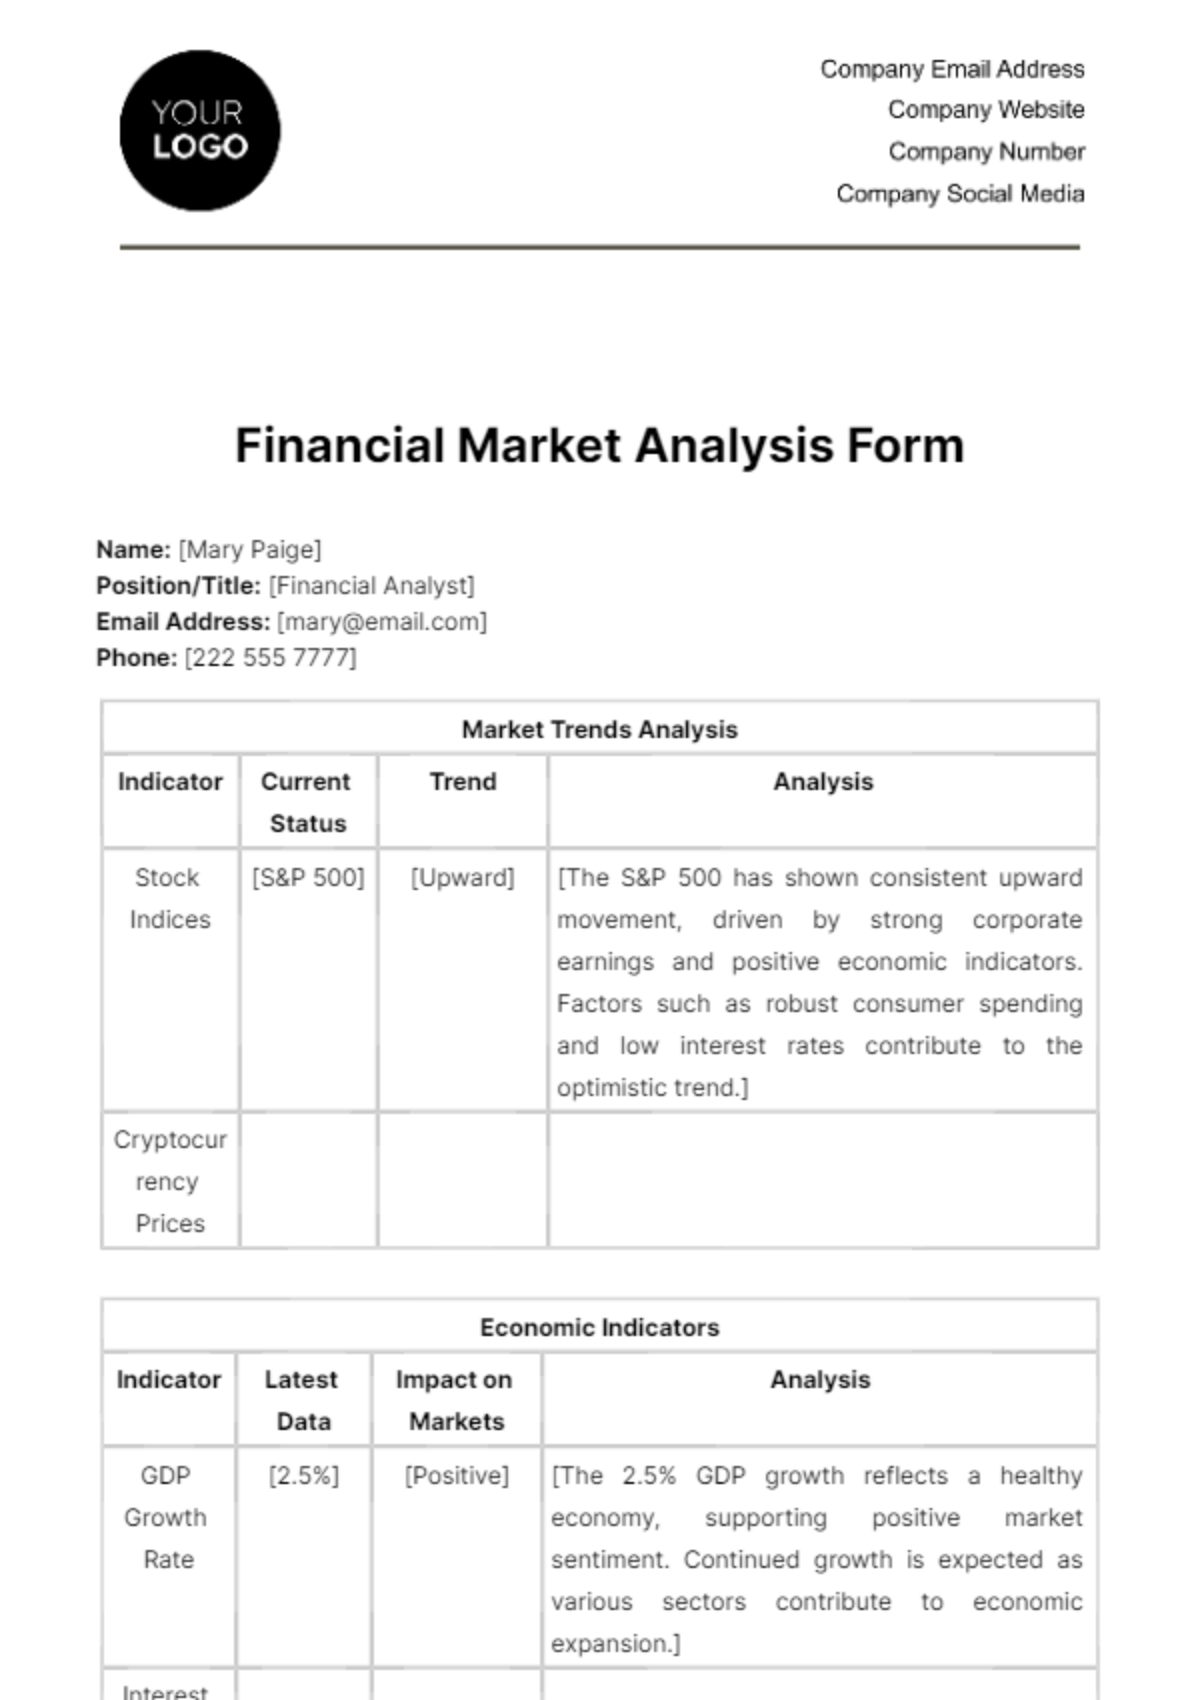 Financial Market Analysis Form Template